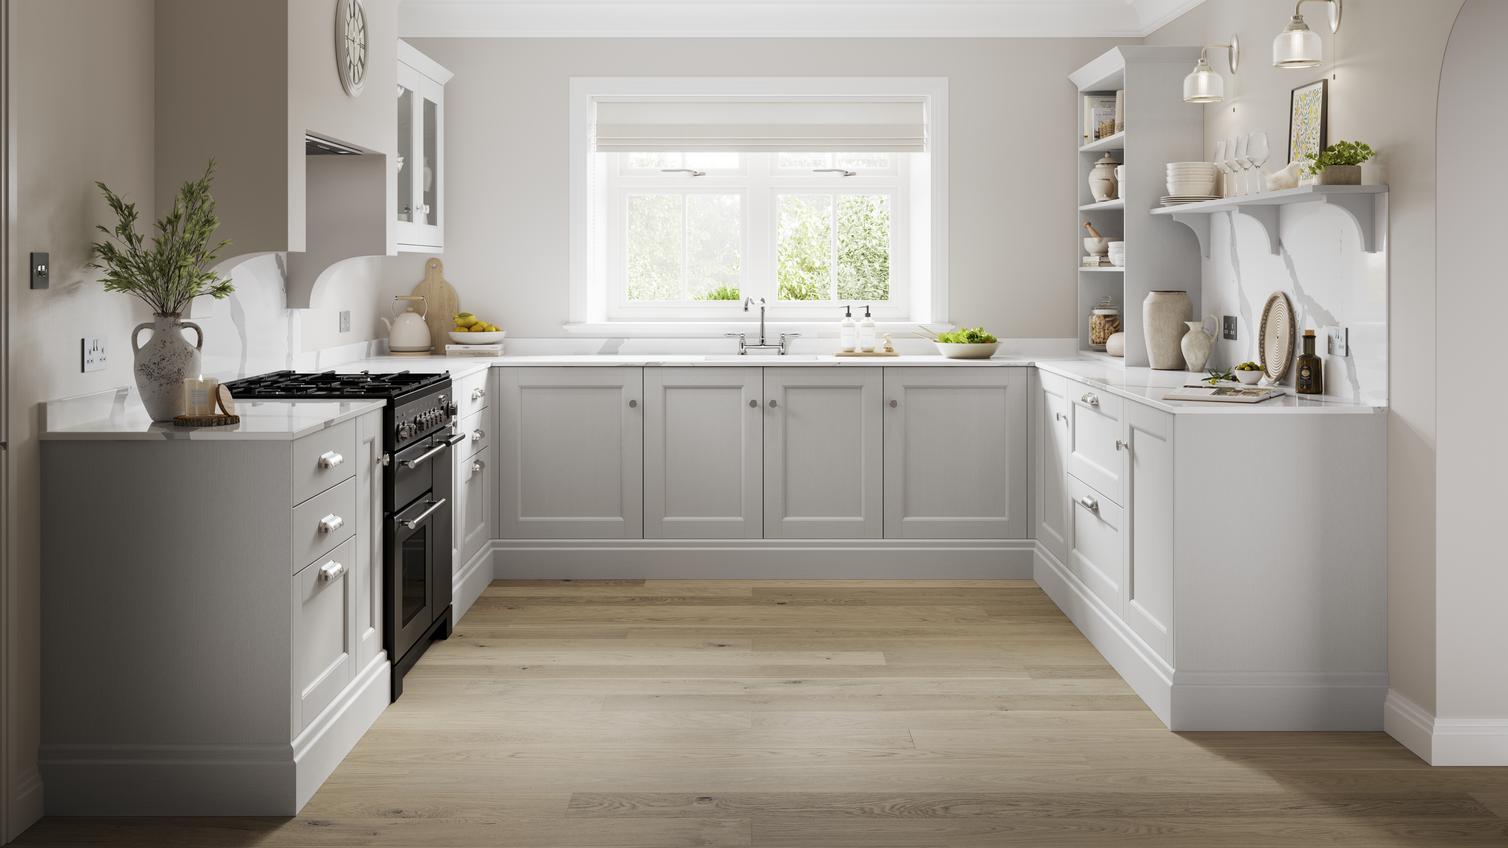 A dove grey shaker kitchen in a u-shape layout. It has oak-style flooring, white stone worktops, and a black range cooker.